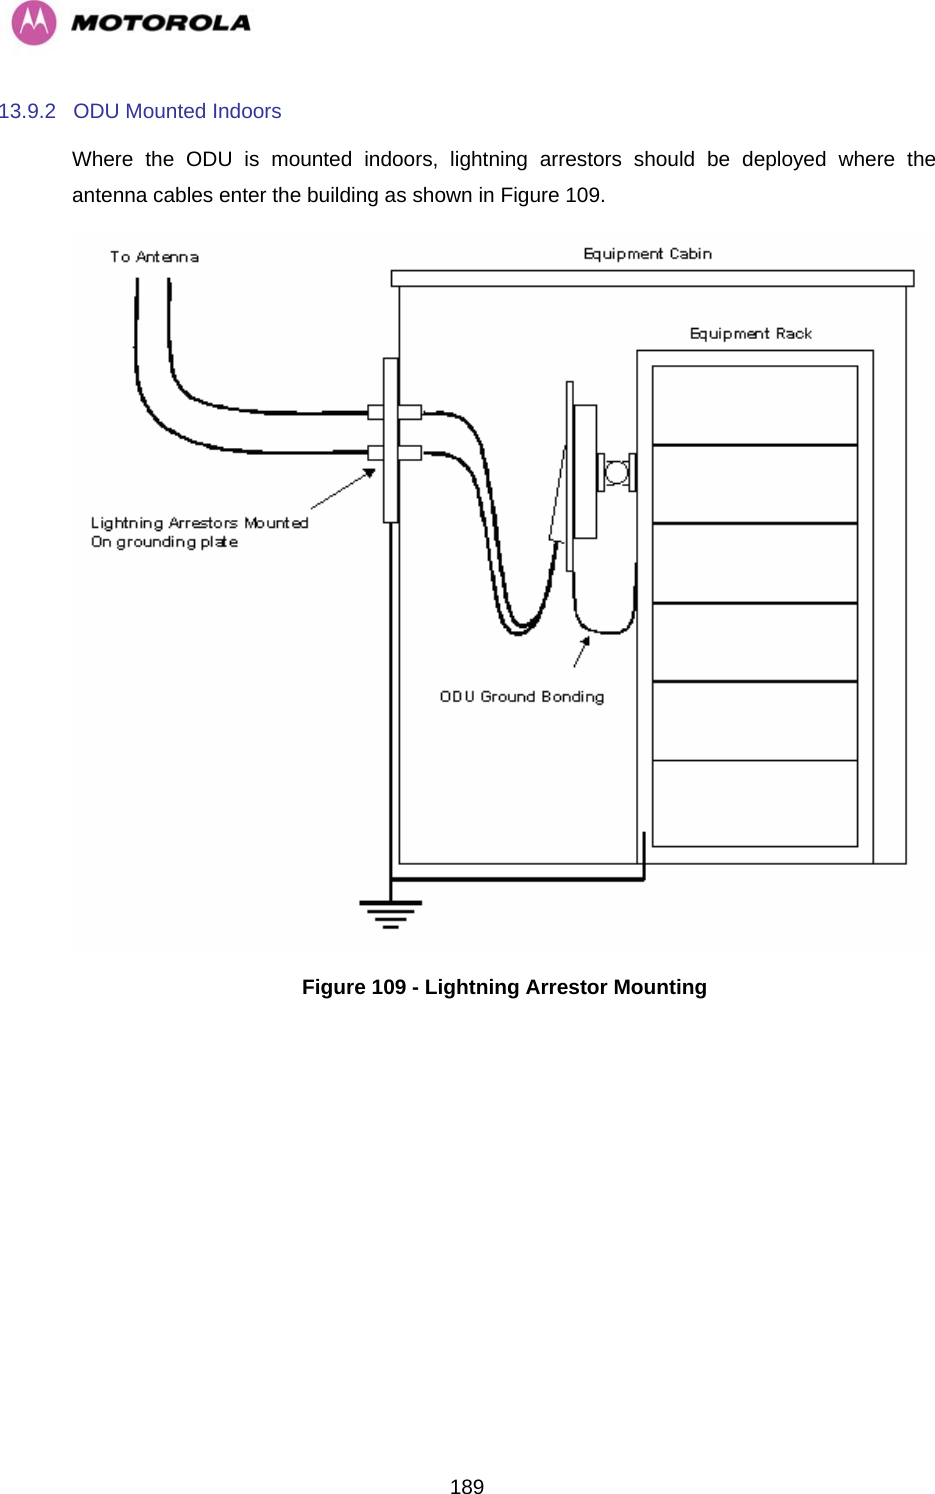   18913.9.2  ODU Mounted Indoors Where the ODU is mounted indoors, lightning arrestors should be deployed where the antenna cables enter the building as shown in Figure 109.  Figure 109 - Lightning Arrestor Mounting 